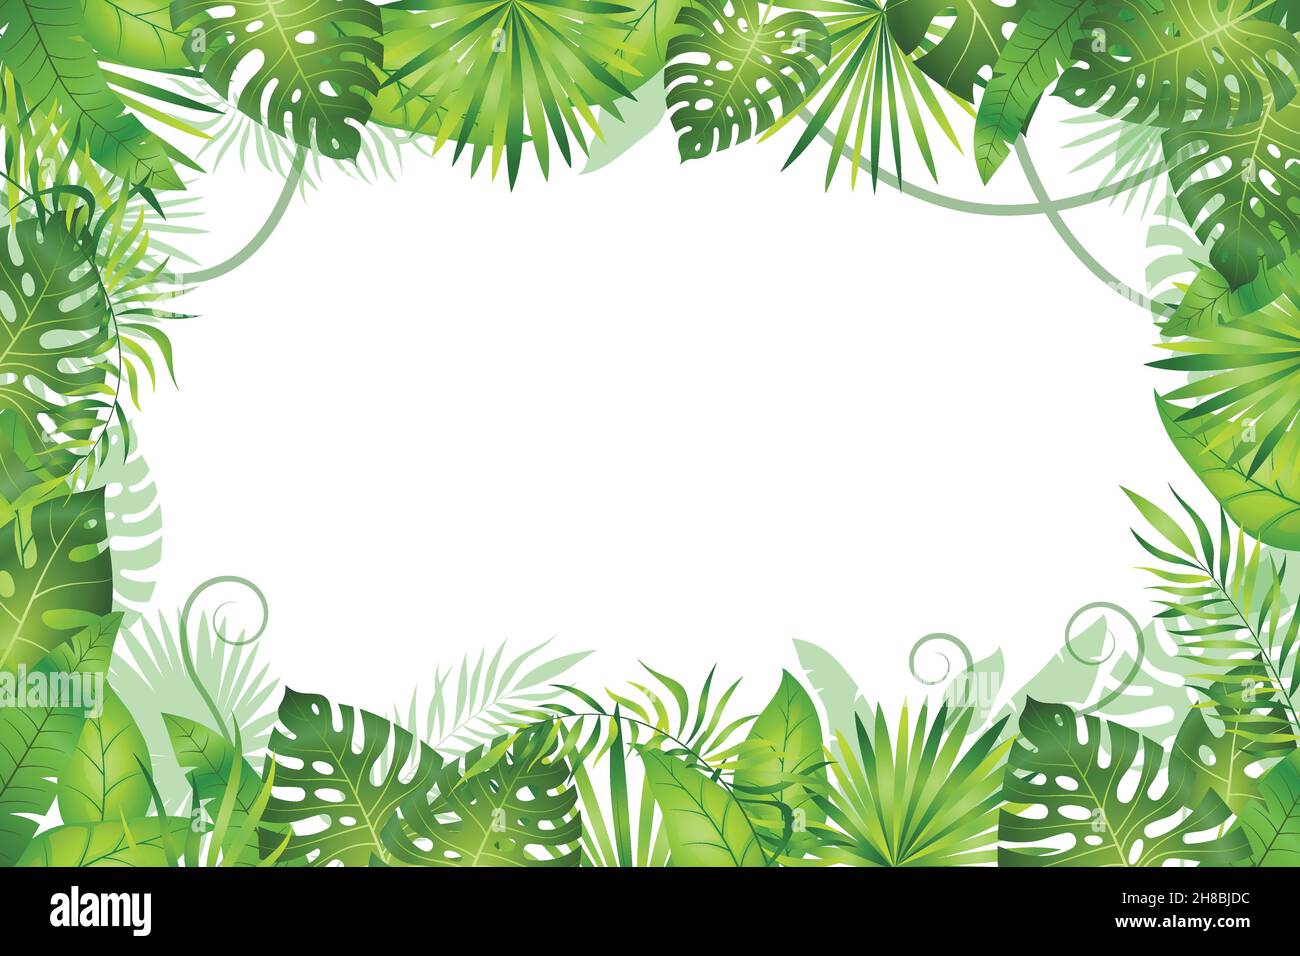 Jungle background. Tropical leaves frame. Rainforest foliage plants, green grass trees. Paradise african wildlife jungle Stock Vector